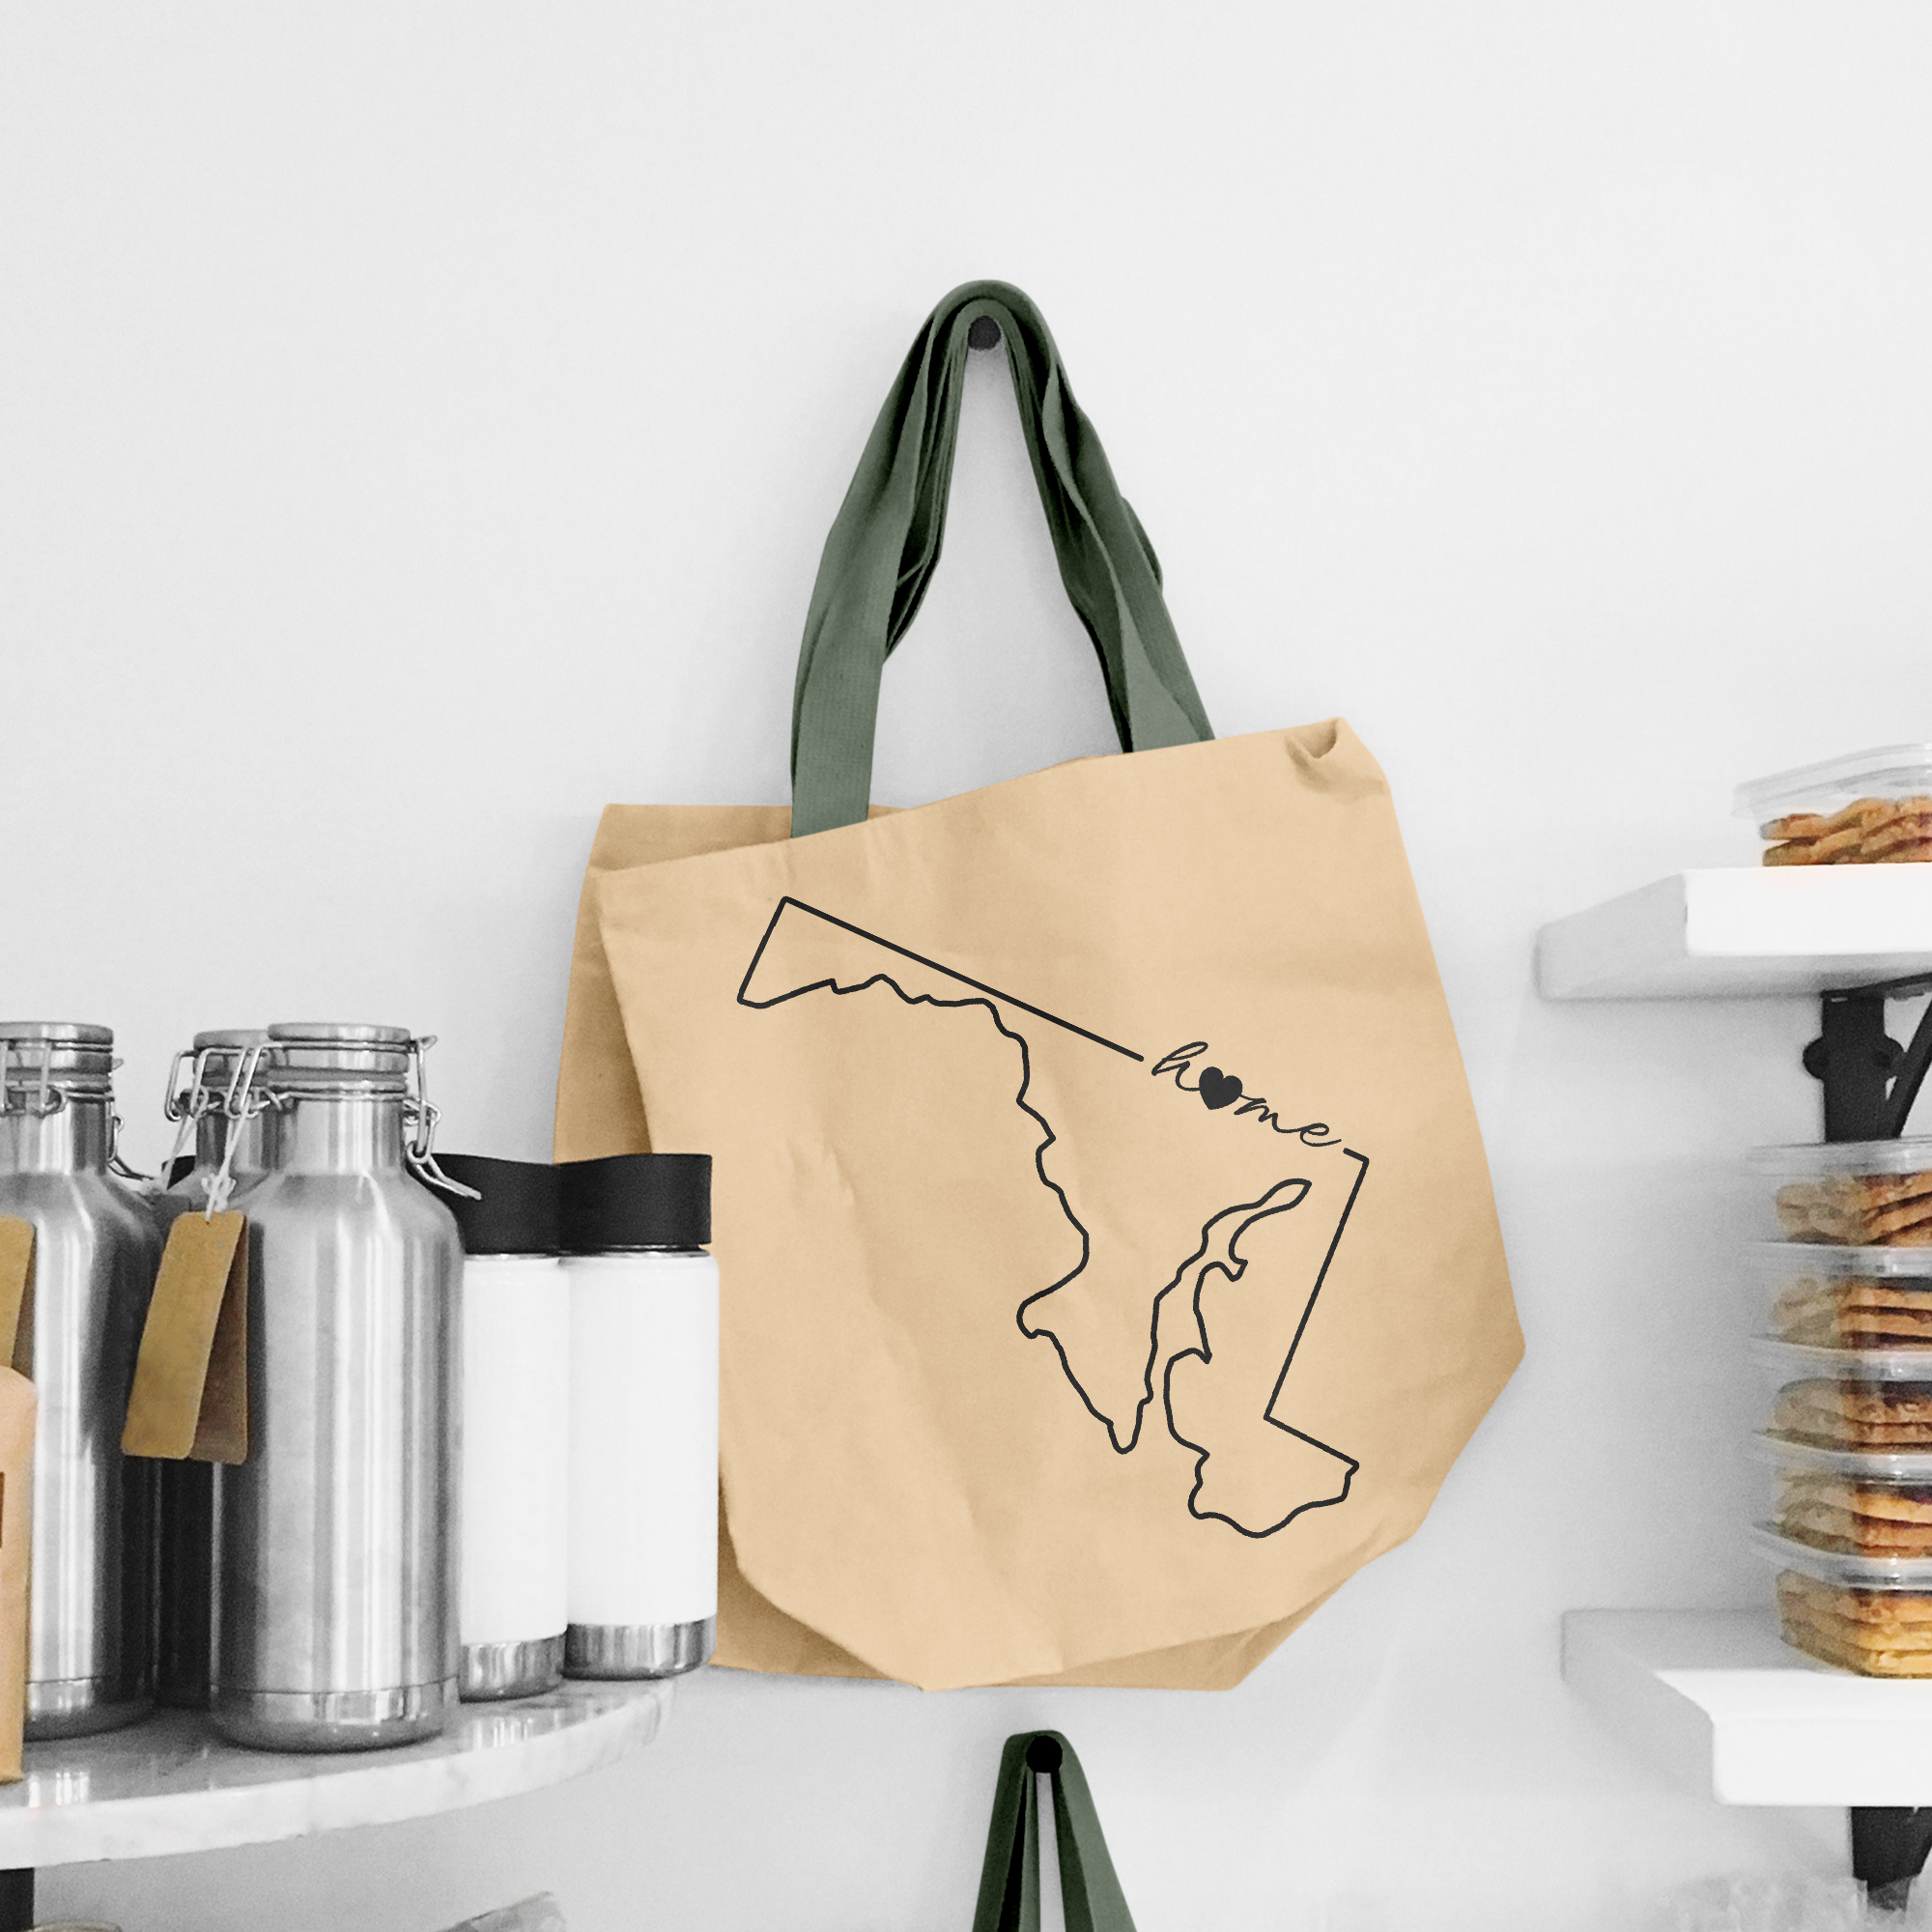 Black illustration of map of Maryland on the beige shopping bag with dirty green handle.